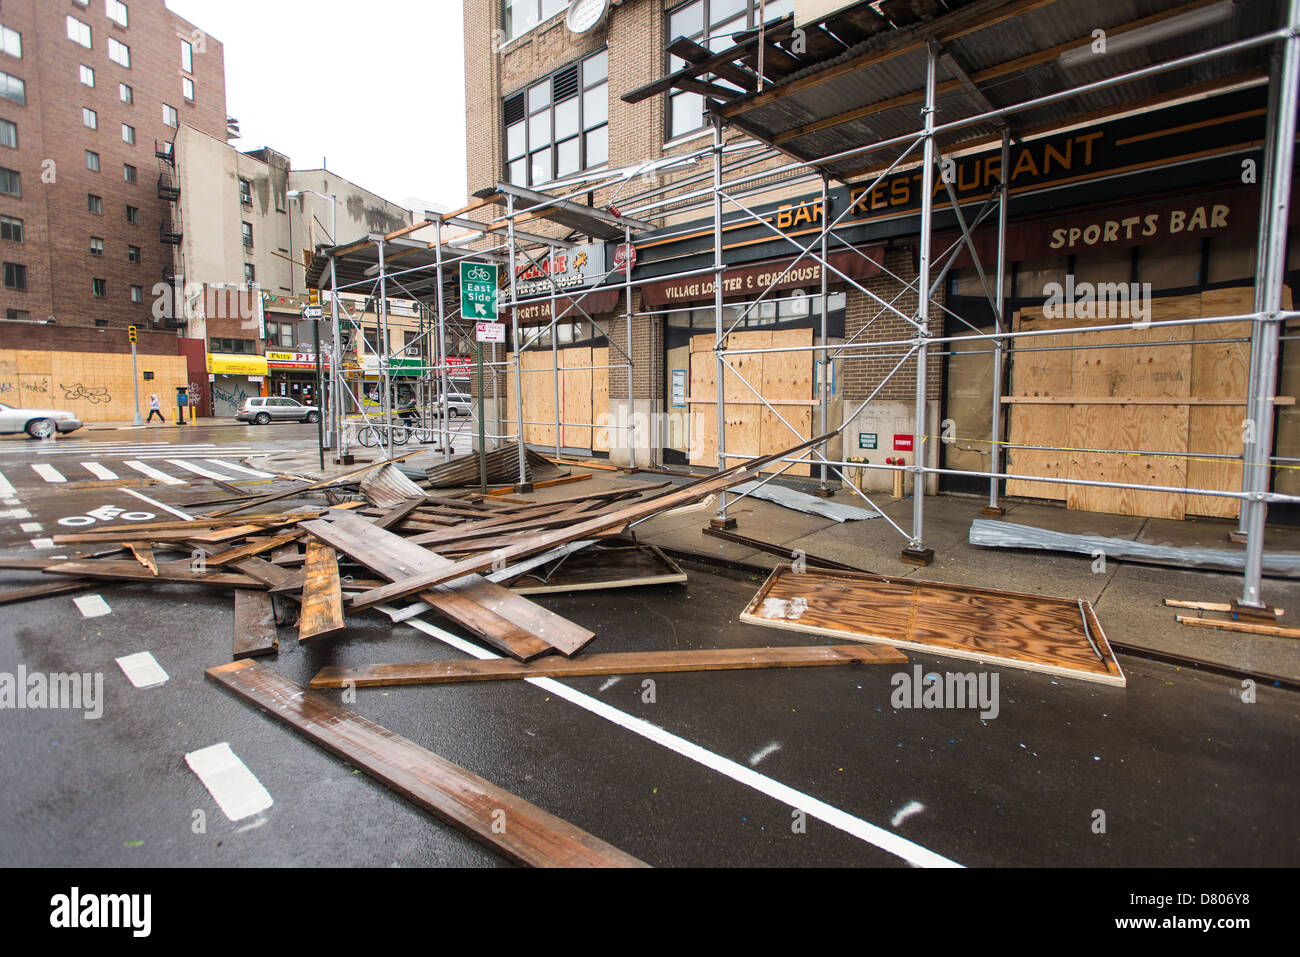 Effects of Hurricane Sandy. Destroyed scaffolding, near intersection of Varick St. and Carmine St. Manhattan, NYC, Oct 30, 2012. Stock Photo